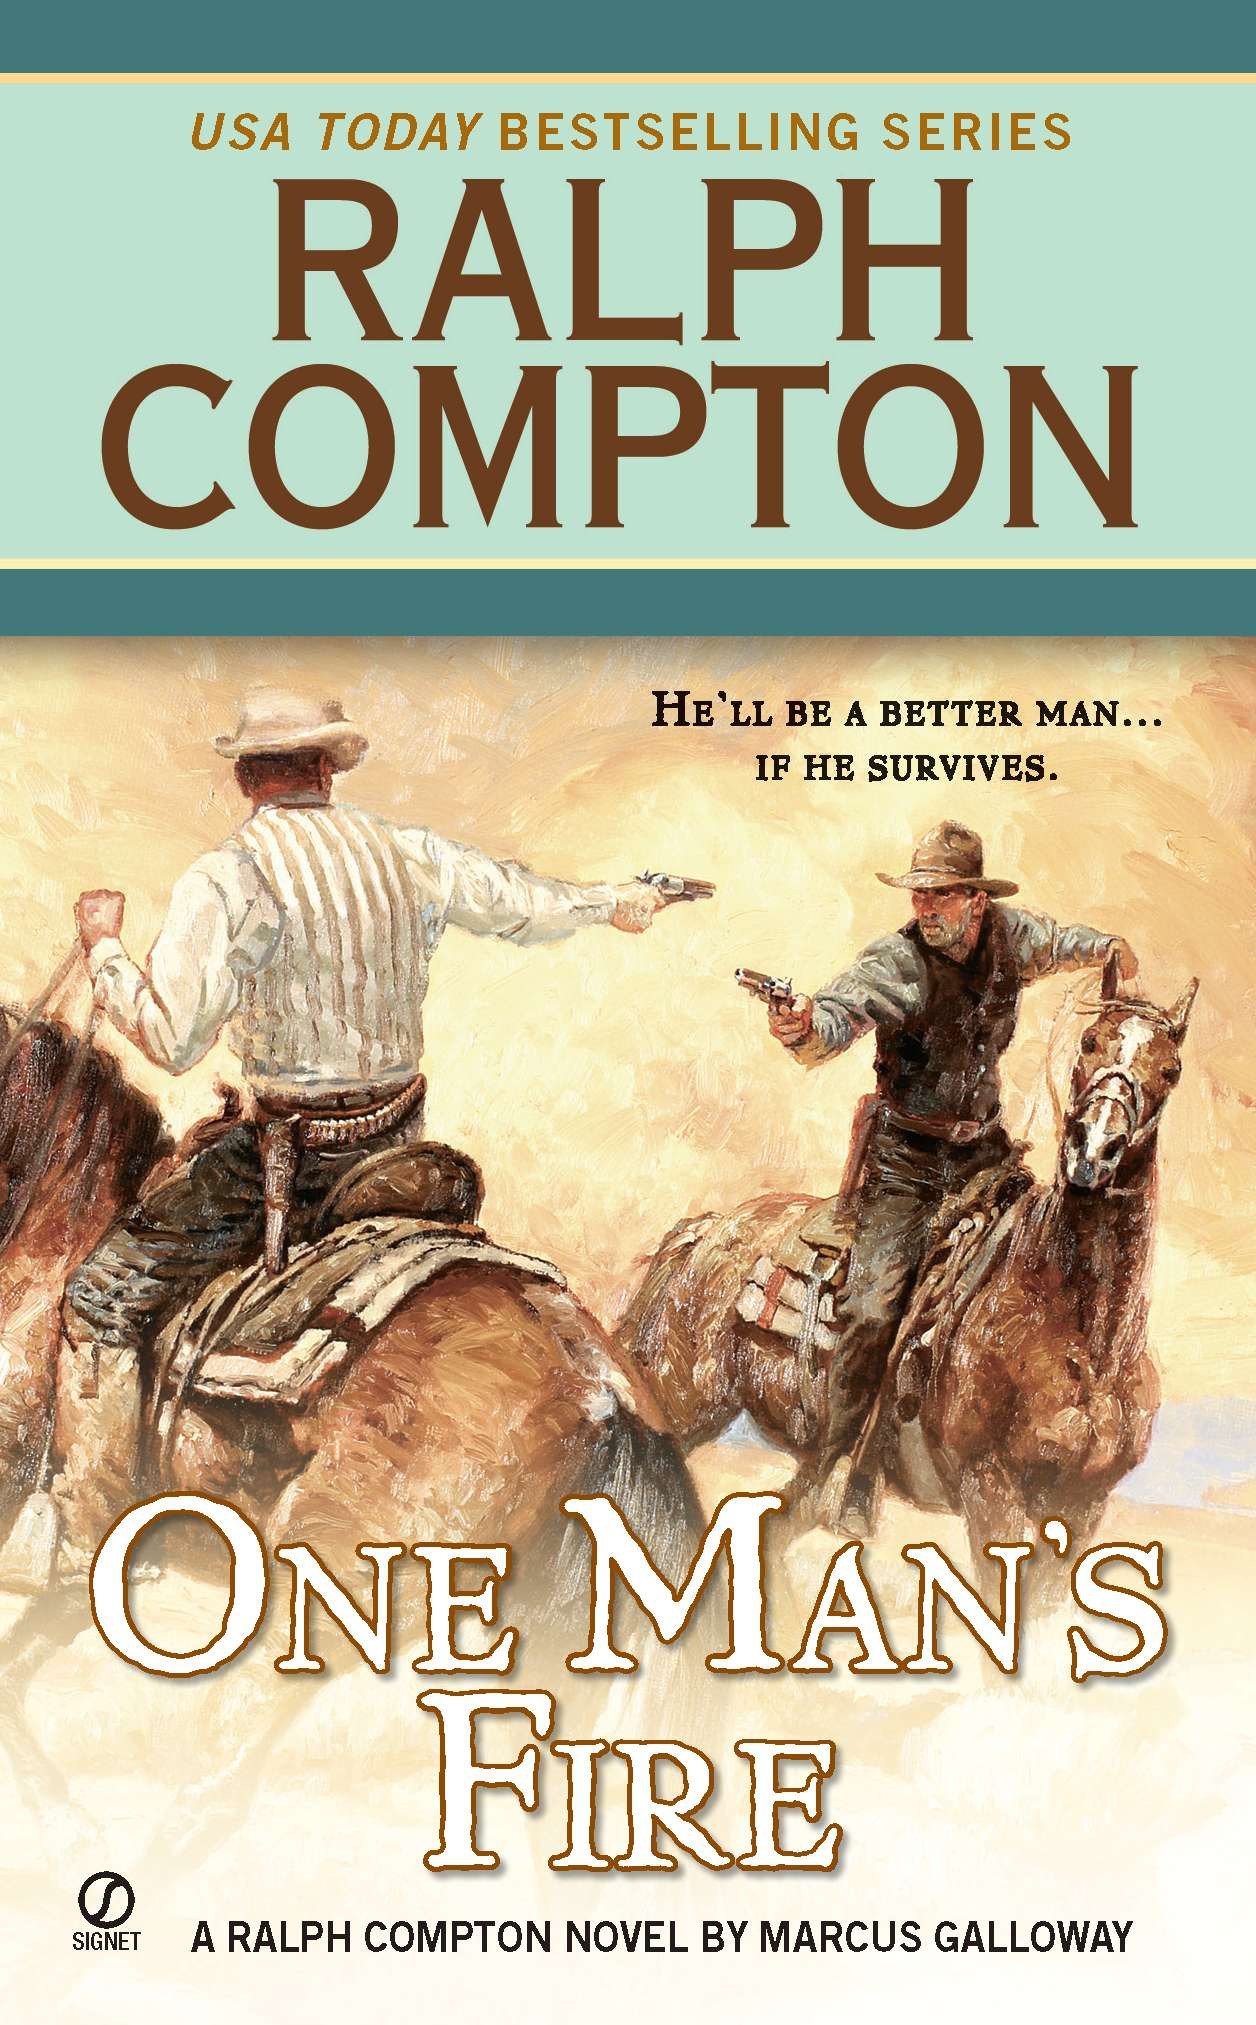 A Ralph Compton Western: Ralph Compton One Man's Fire (Paperback) - image 1 of 1